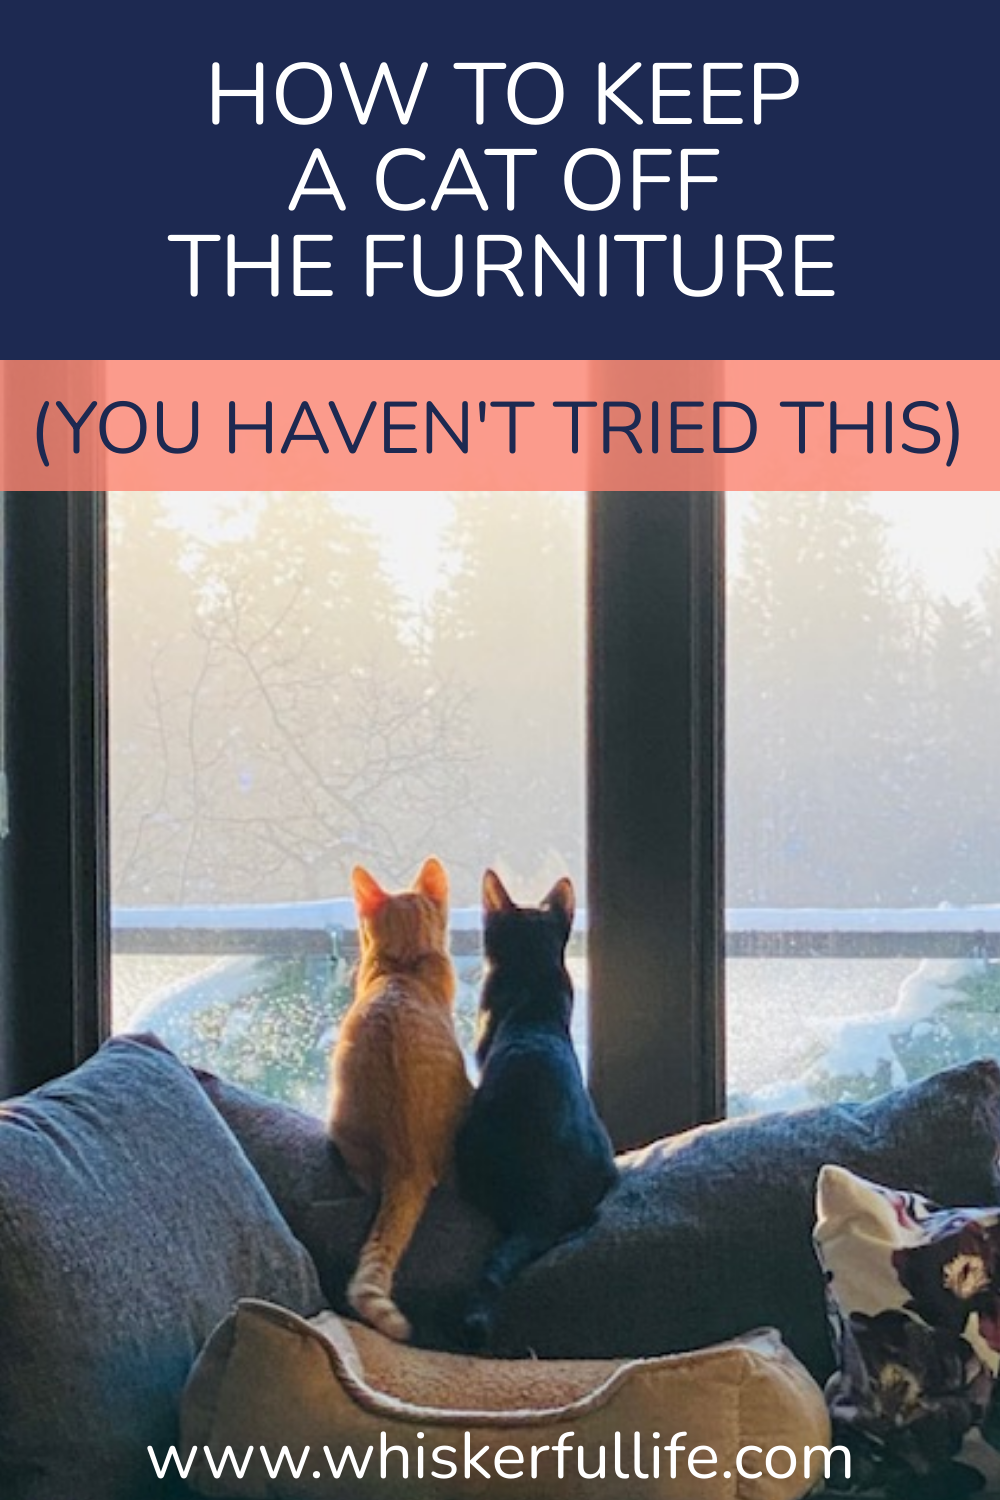 How to Keep a Cat Off the Furniture